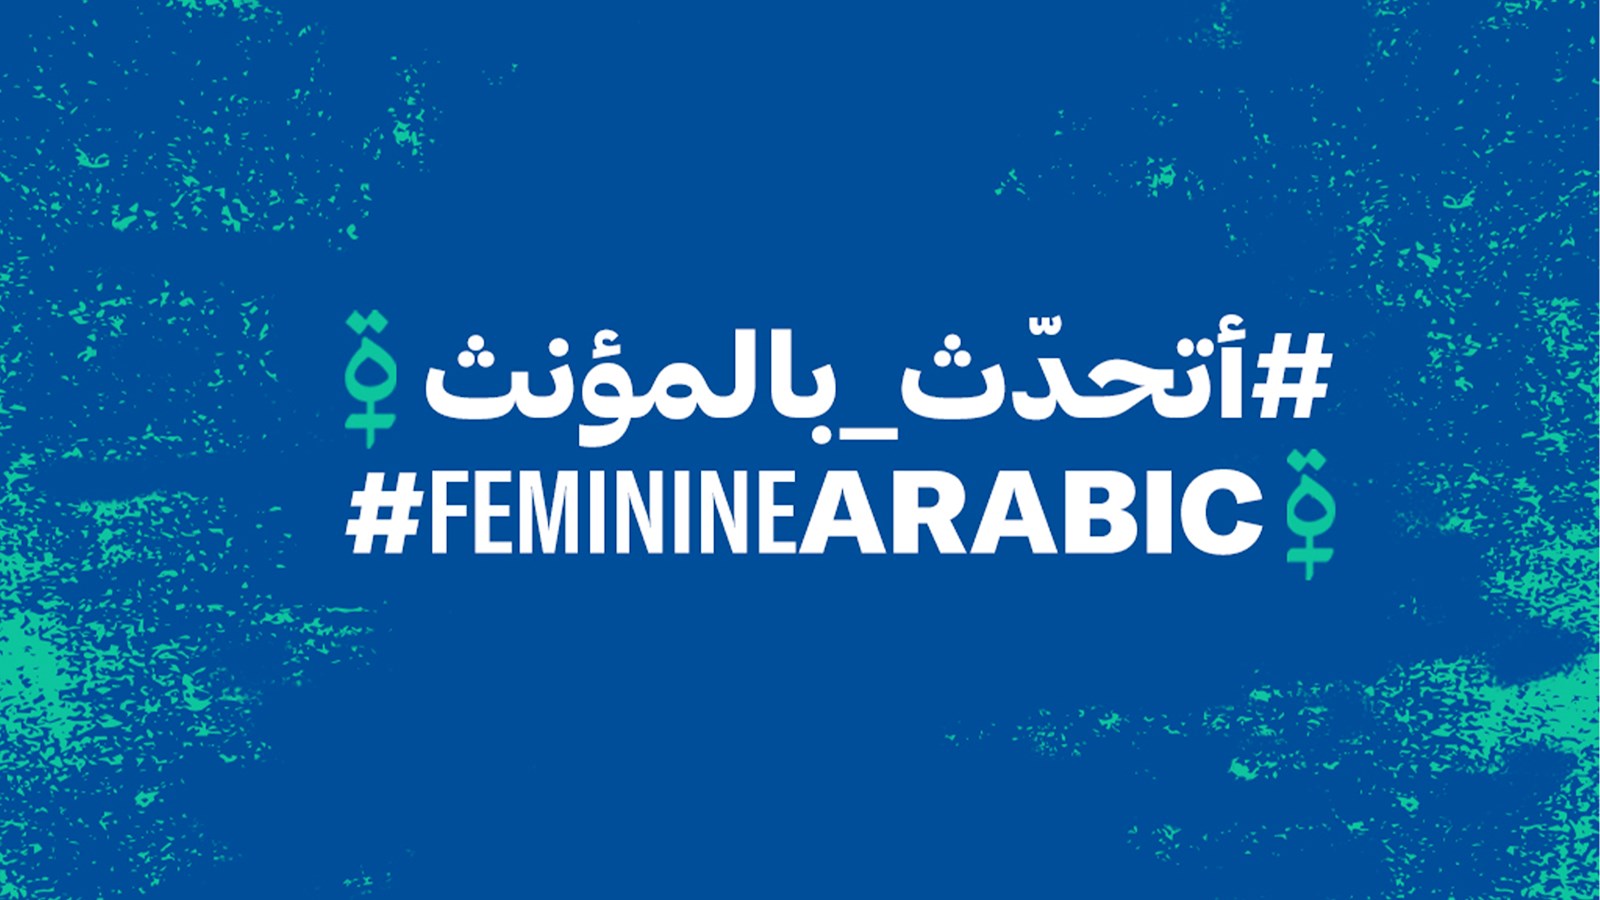 text that reads 'feminine Arabic' on a blue background